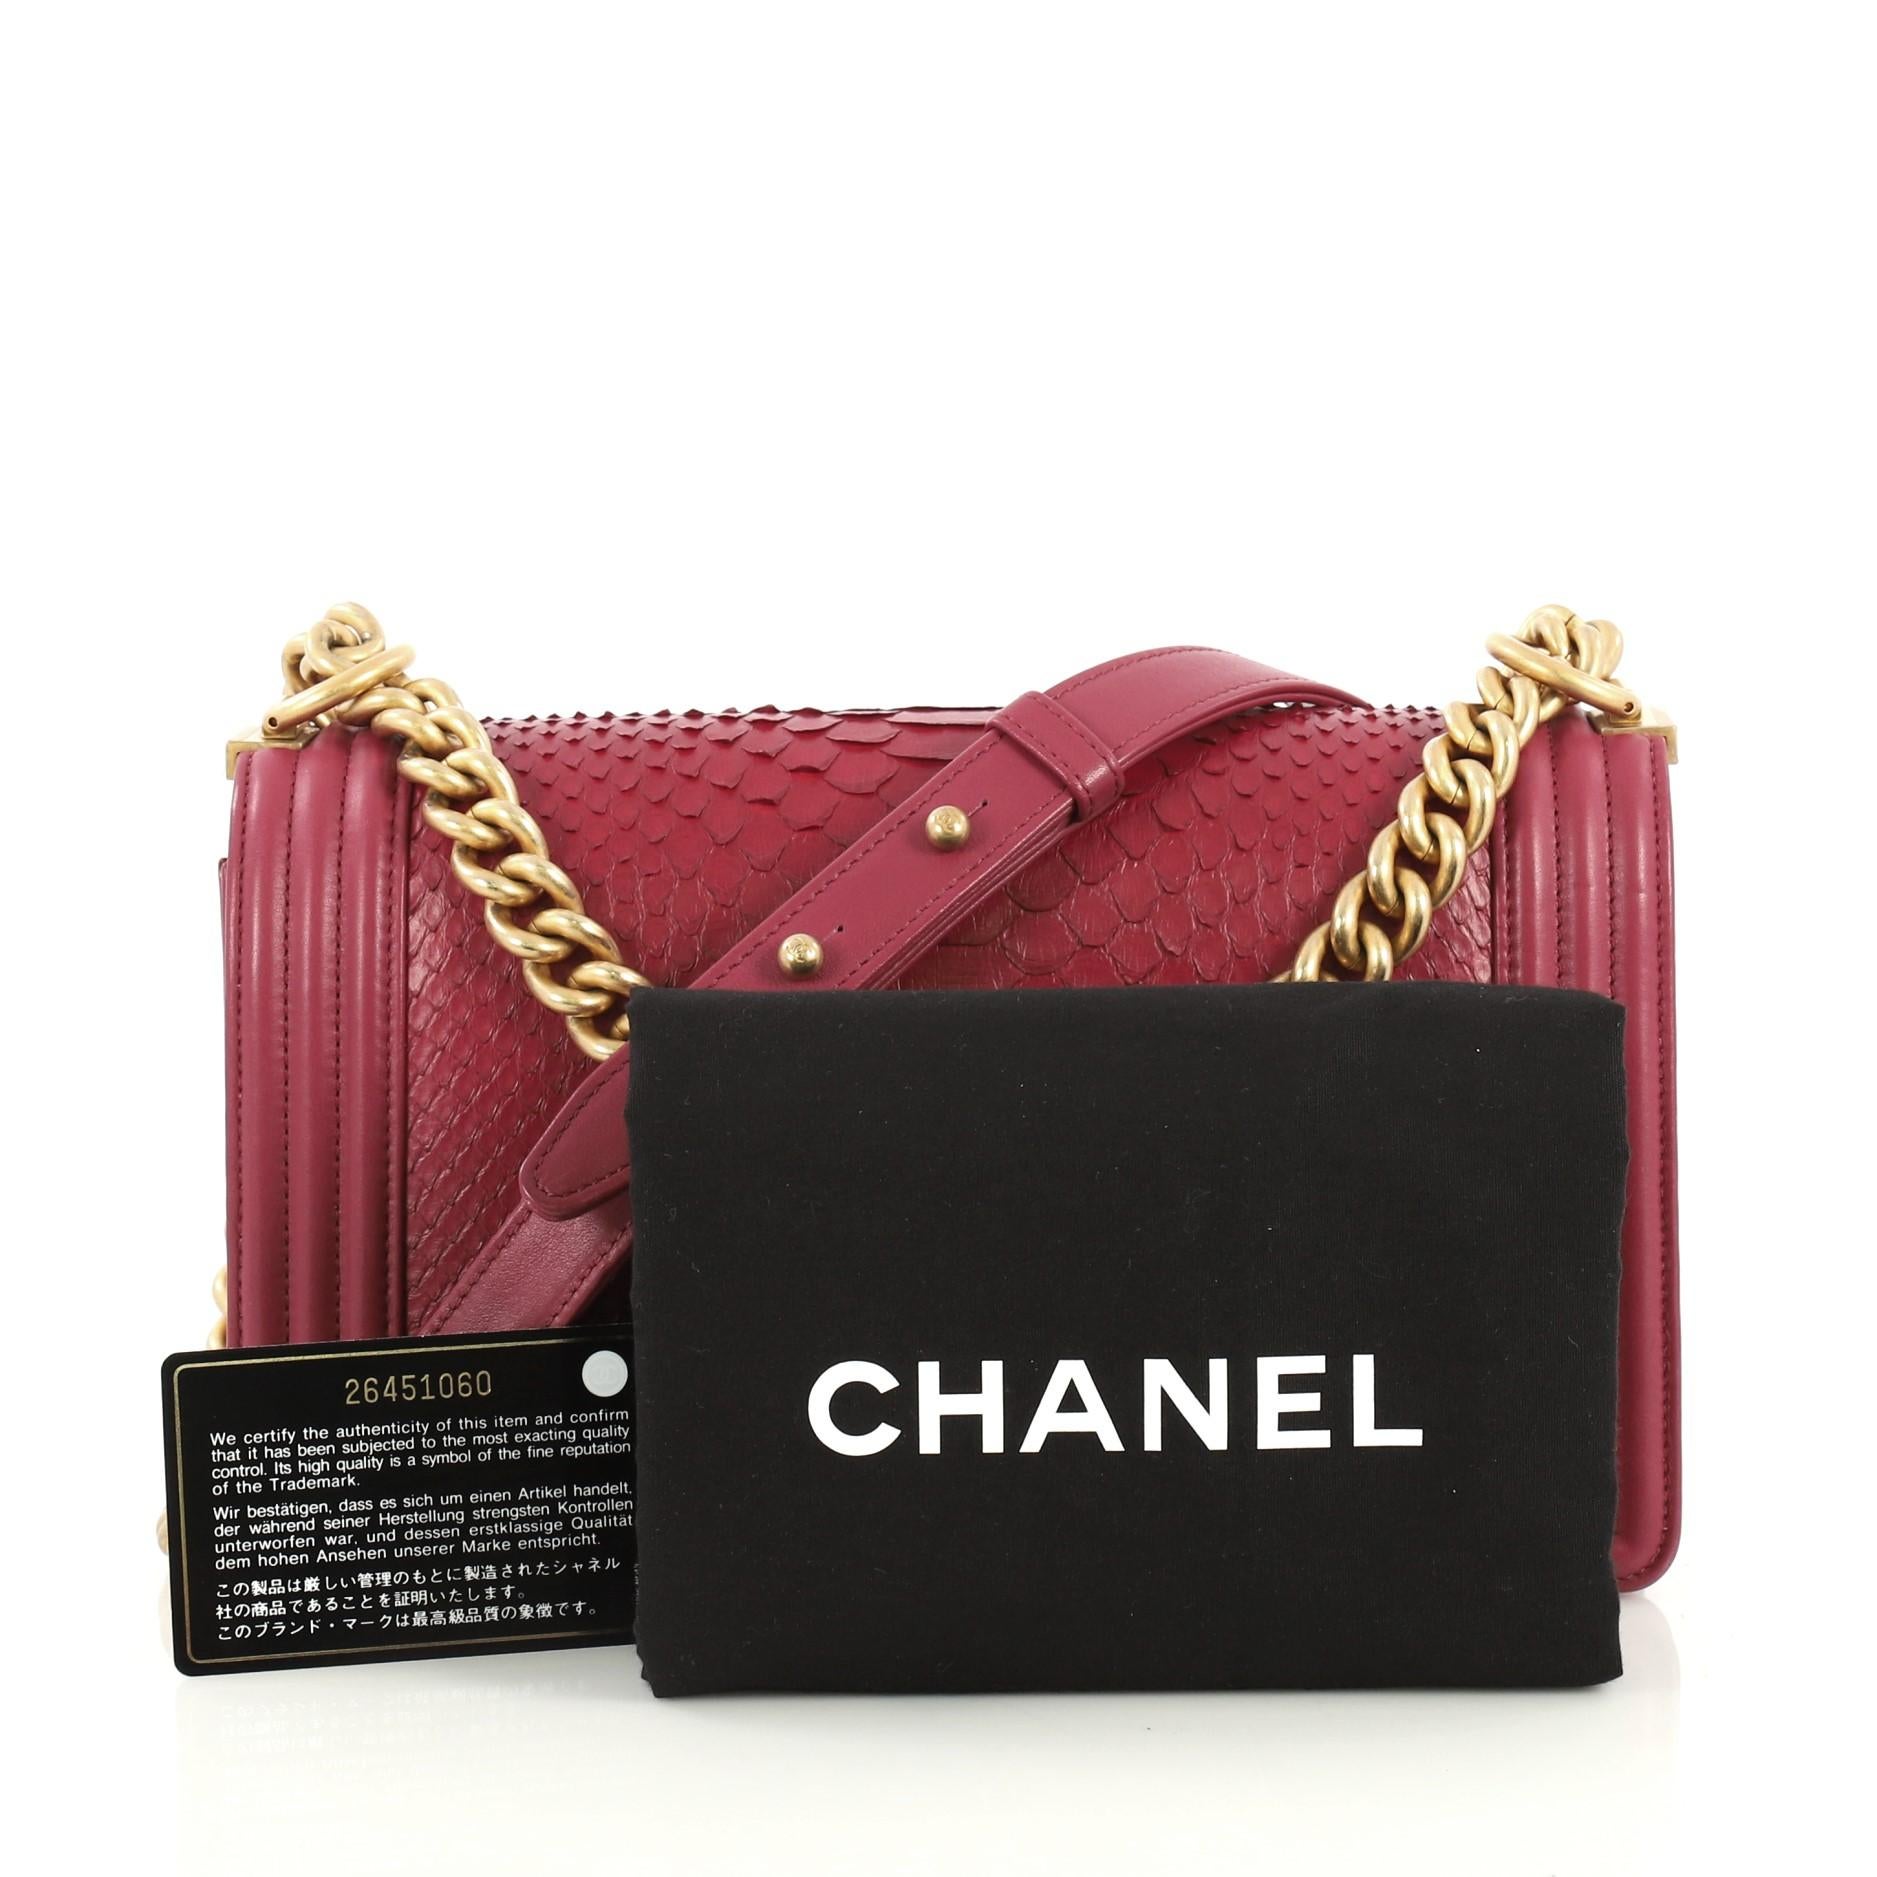 This Chanel Boy Flap Bag Python Old Medium, crafted in genuine purple python and leather, features a chain link strap with a leather pad and aged gold-tone hardware. Its Boy push-lock closure opens to a purple leather interior with slip pocket.